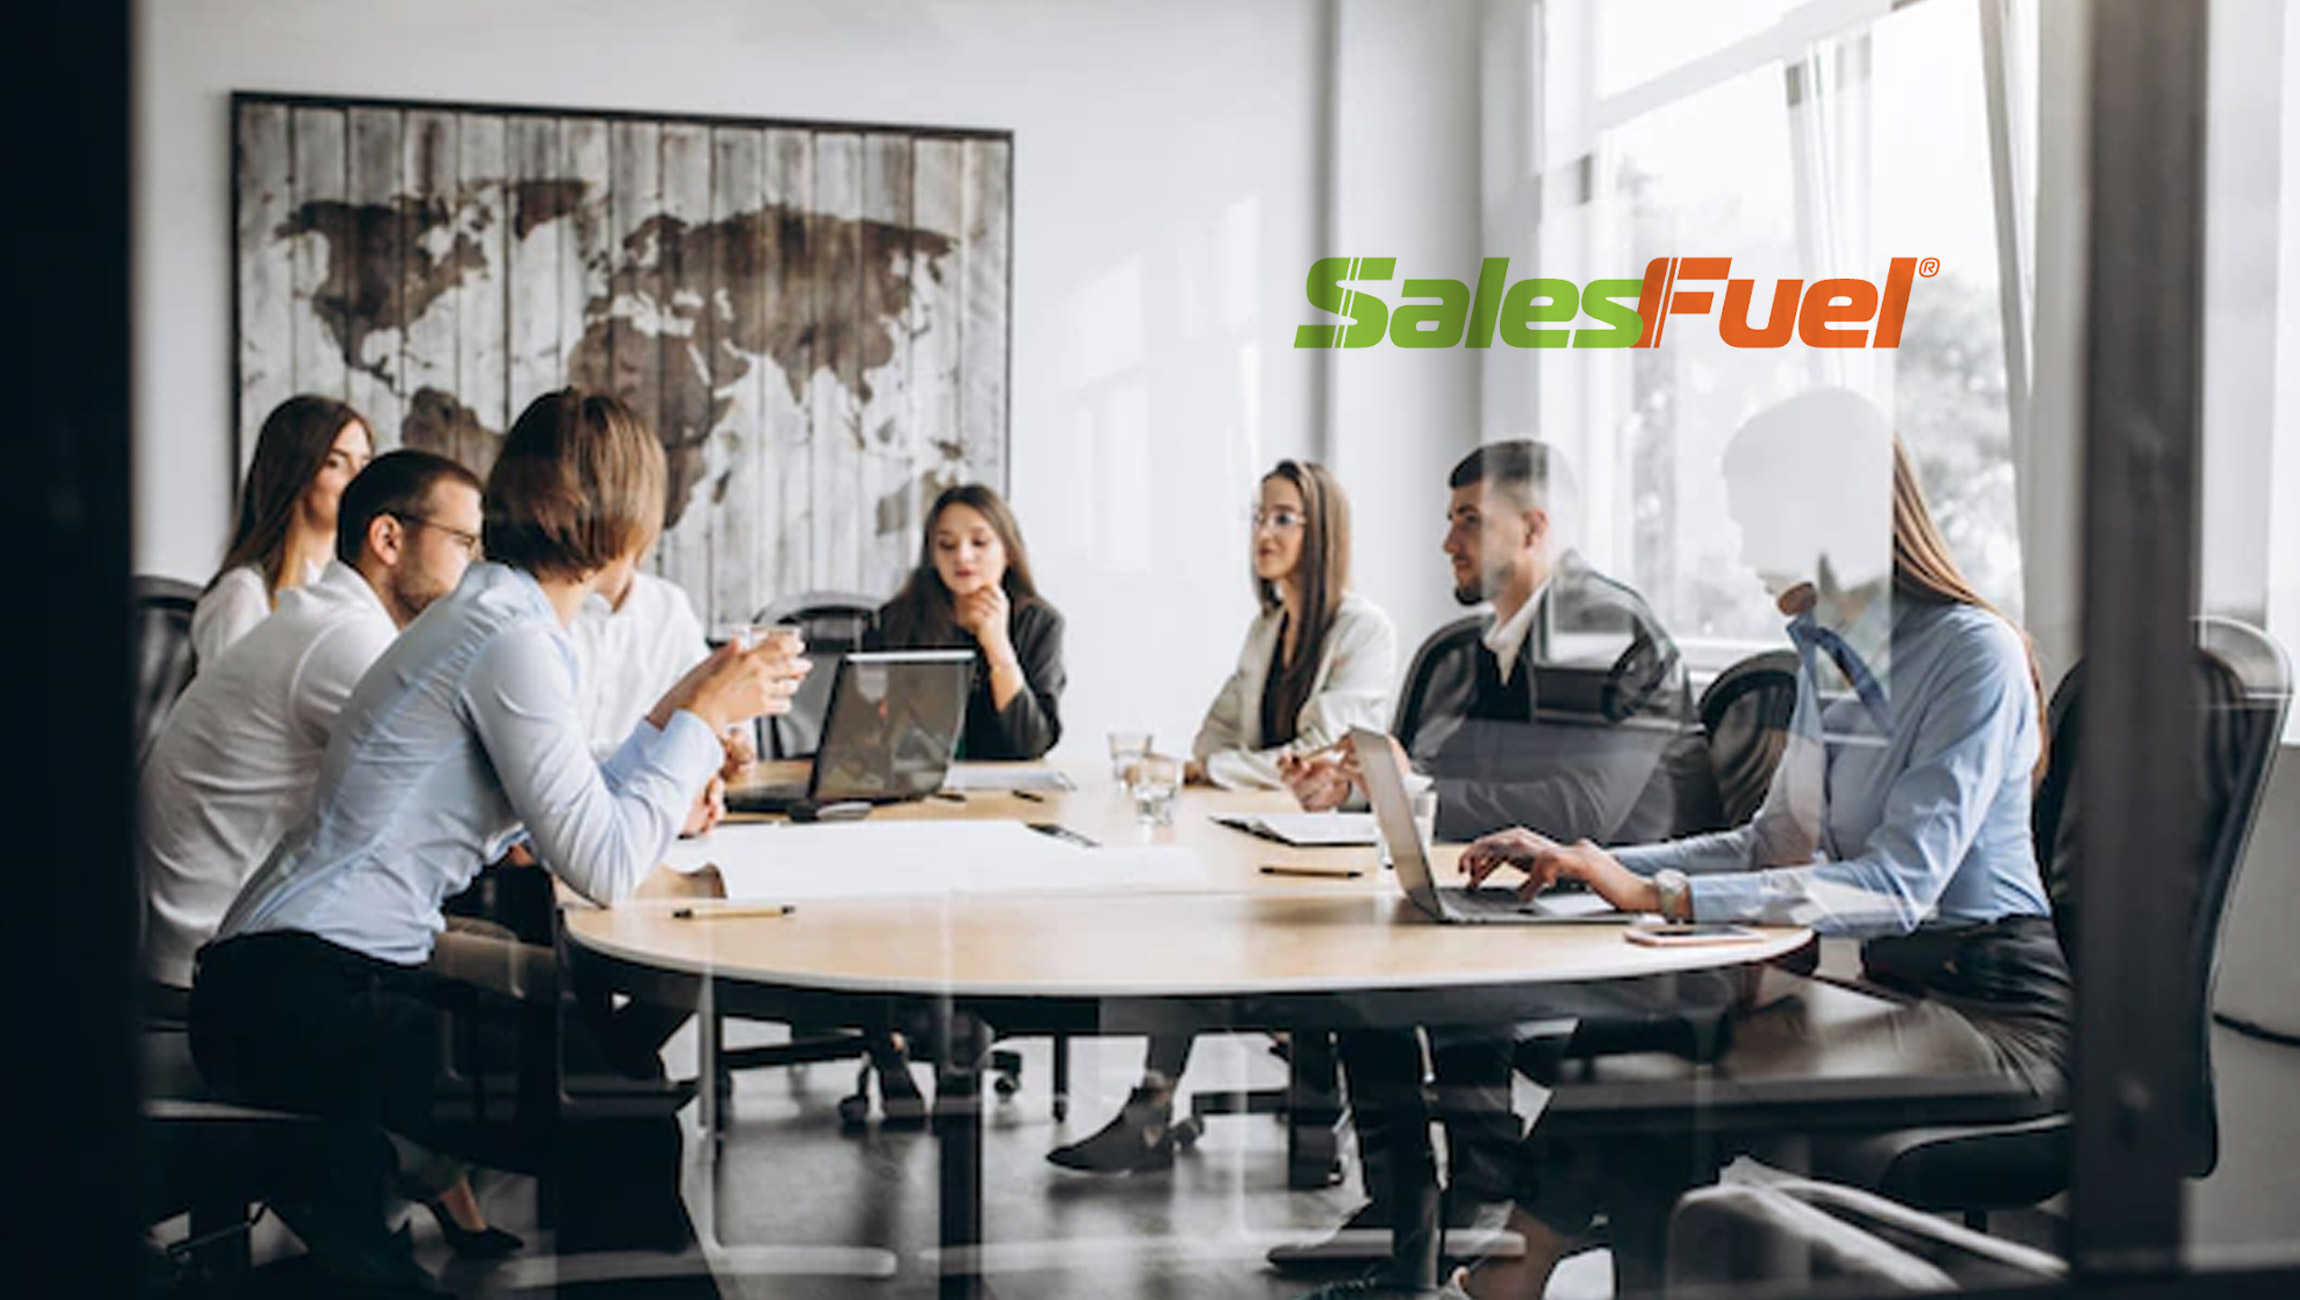 SalesFuel Launches SalesCred, The Self-Discovery App for Building Sales Credibility and Business Relationships Built on Trust